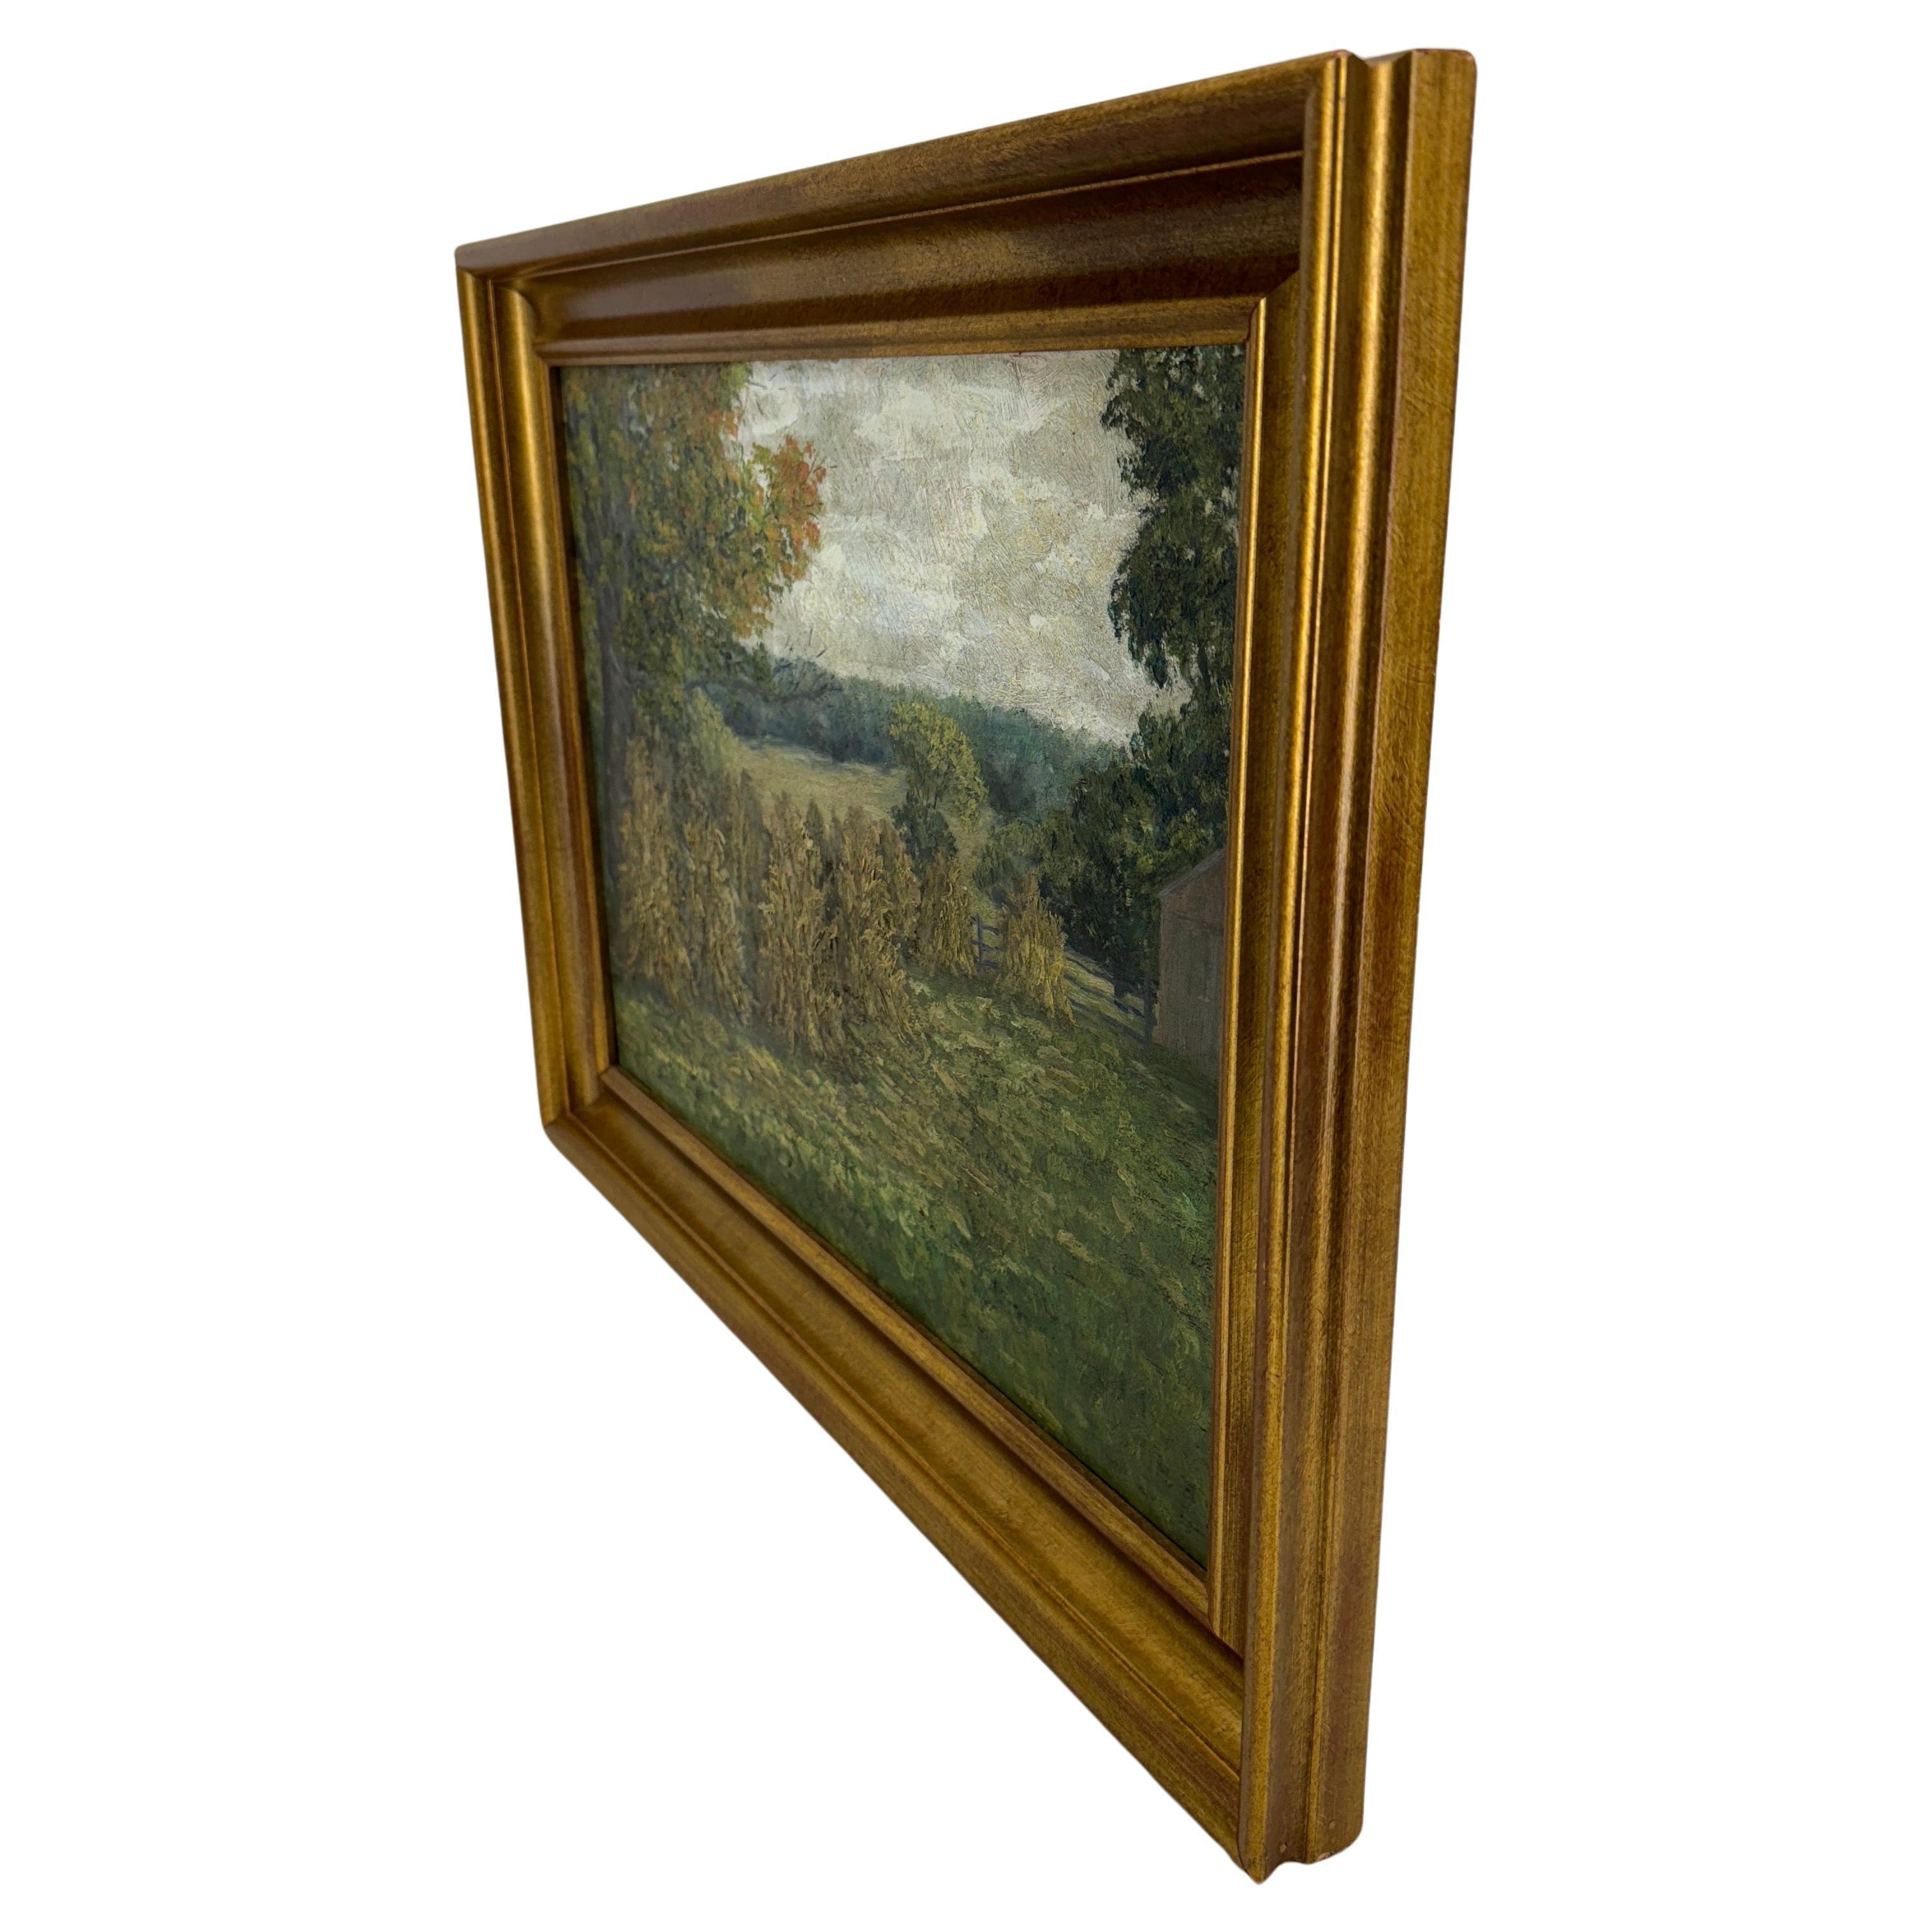 Hand-Crafted French Haystack Field Landscape Oil Painting Framed, Early 20th Century For Sale